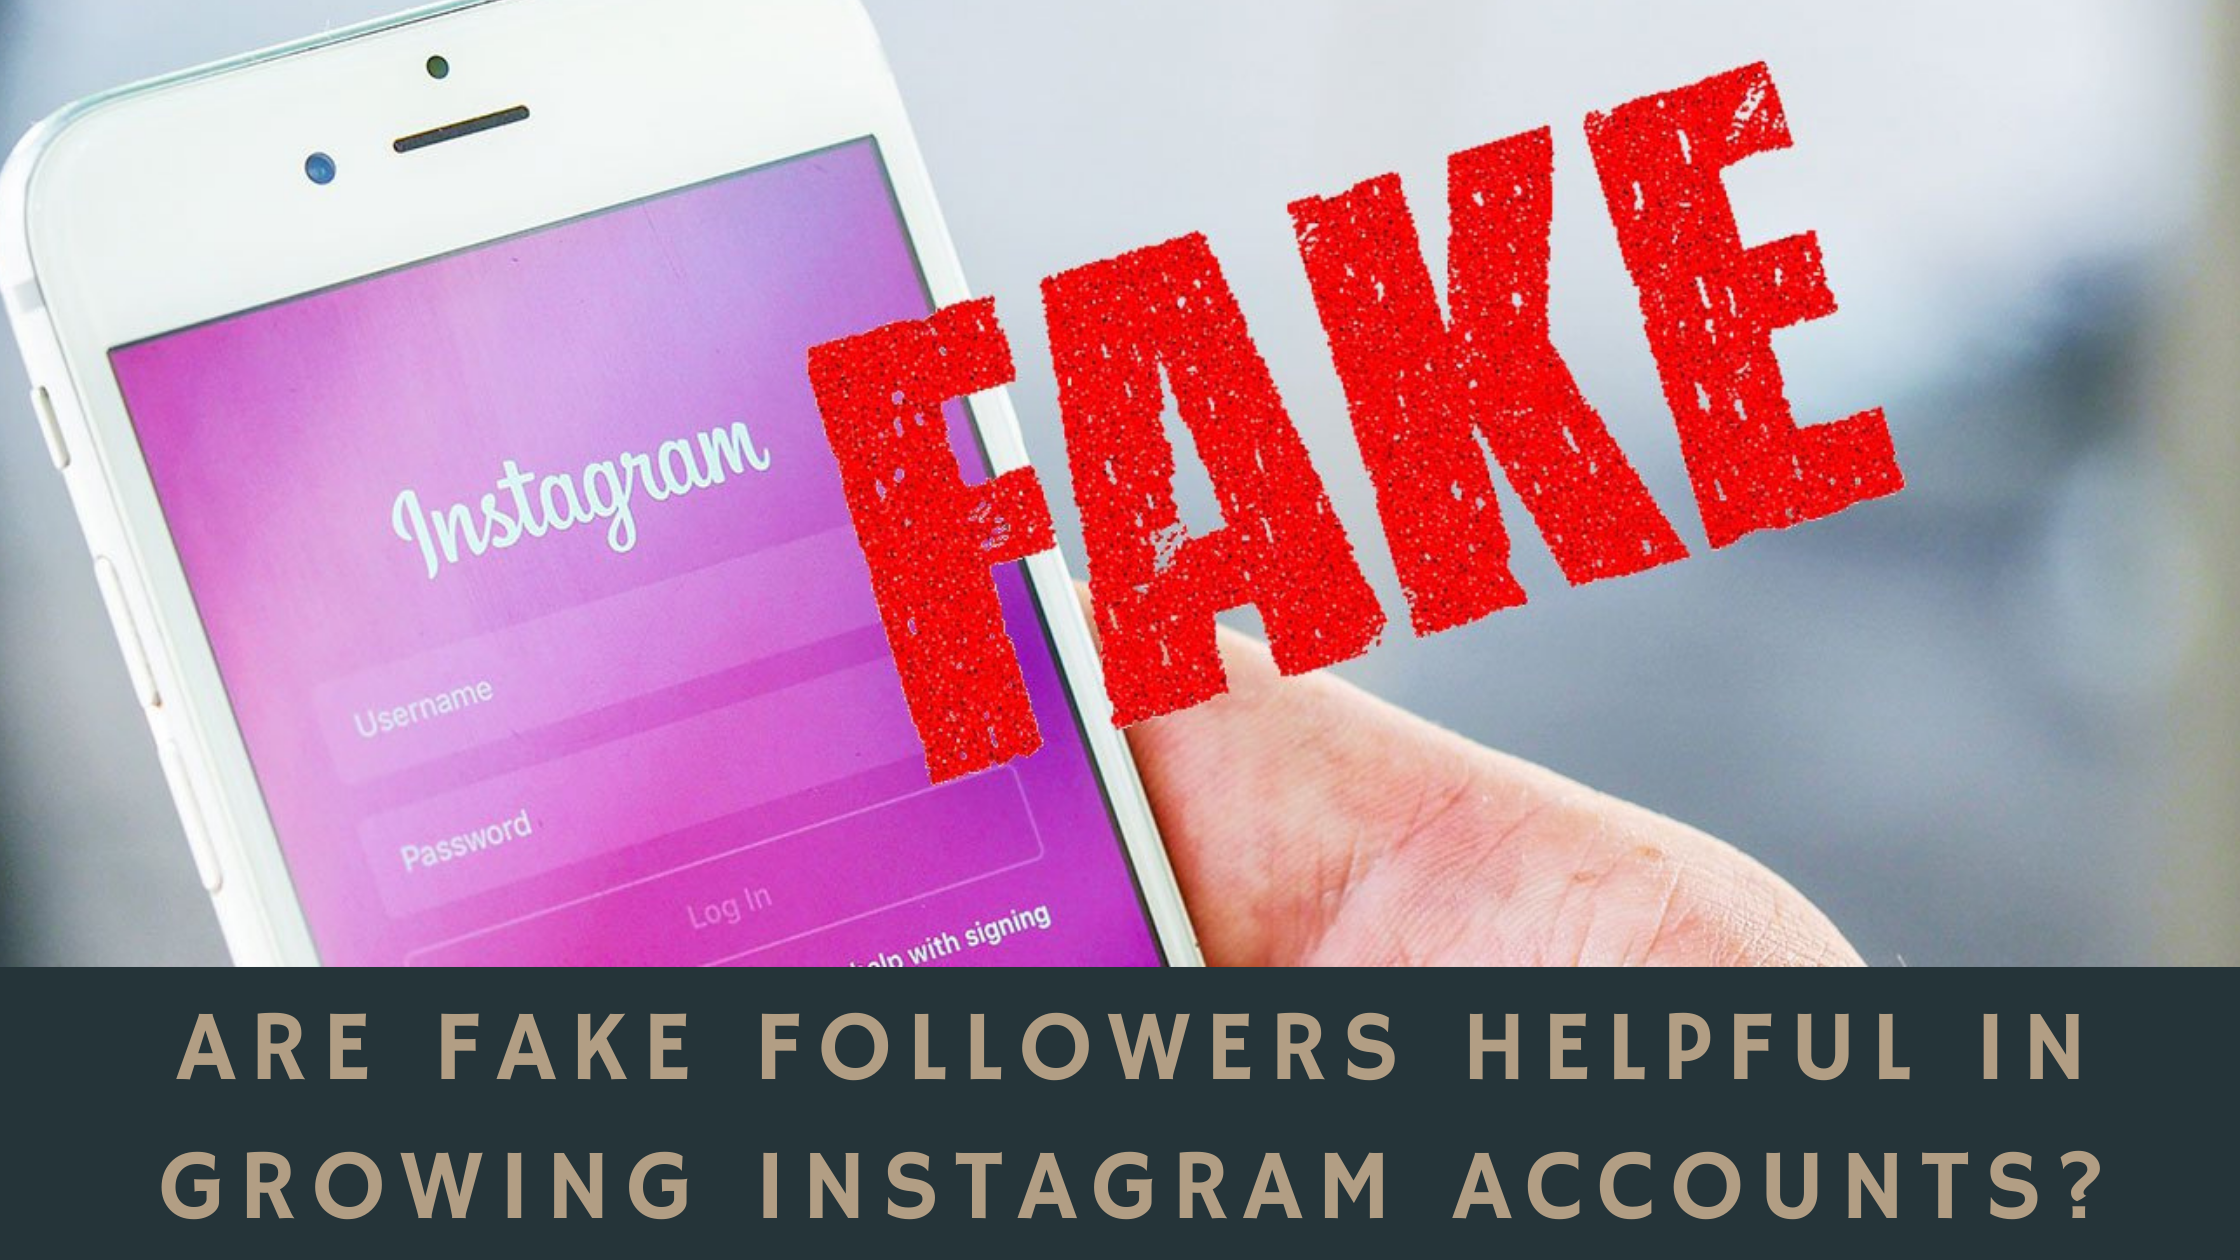 Are Fake followers helpful in growing Instagram accounts?